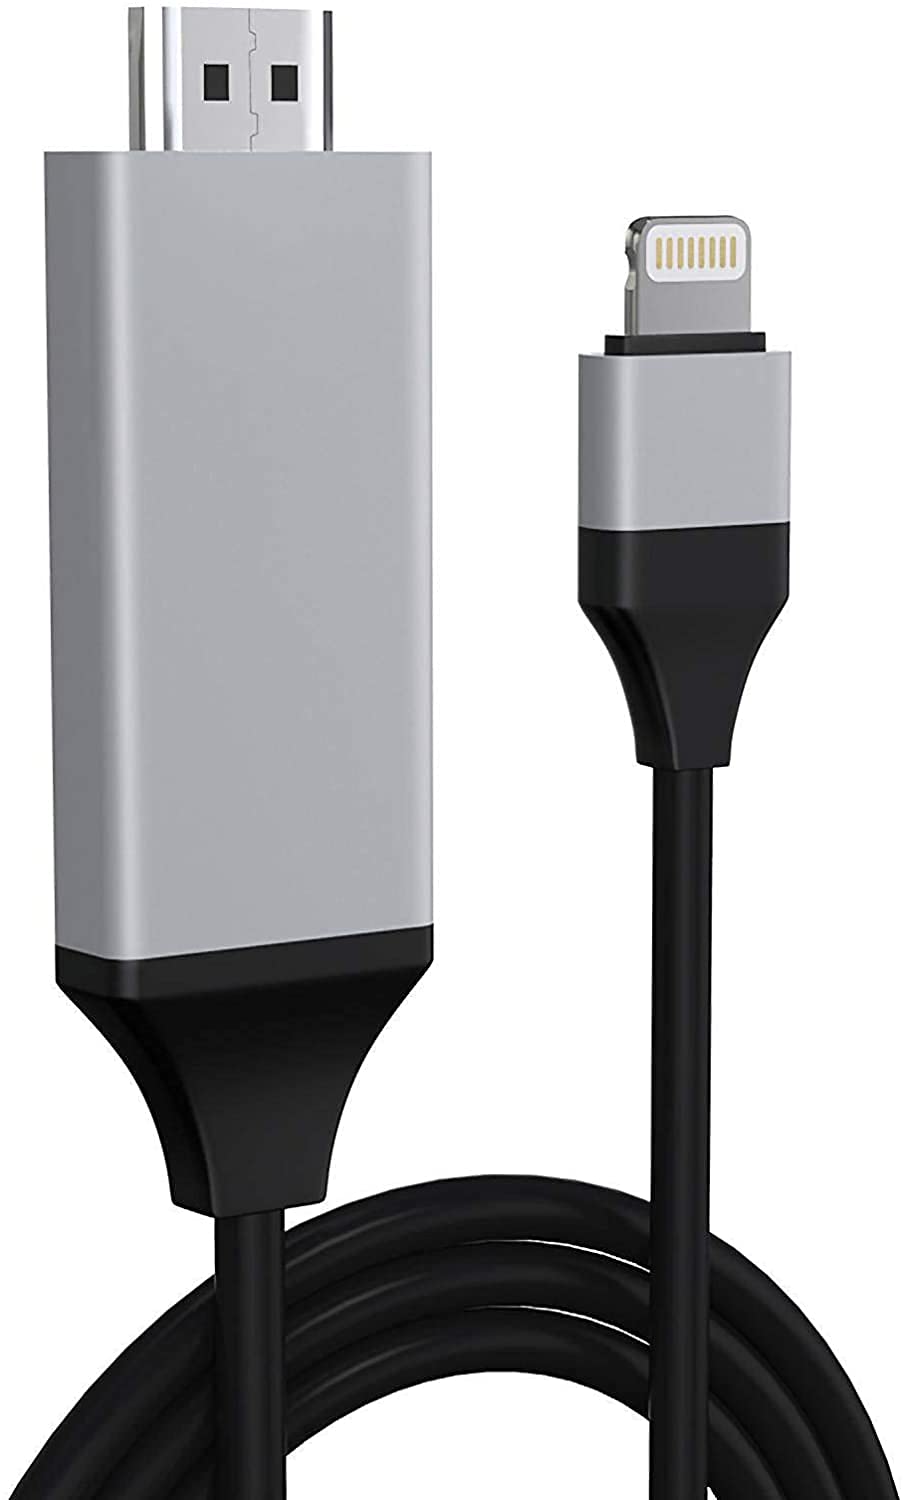  [AUSTRALIA] - [Apple MFi Certified] Lightning to HDMI Adapter Cable, 1080P Digital AV Sync Screen Connector HDTV Cable Adapter Compatible with iPhone, iPad, iPod on TV/Monitor/Projector-NO Need Power Supply-6.6FT